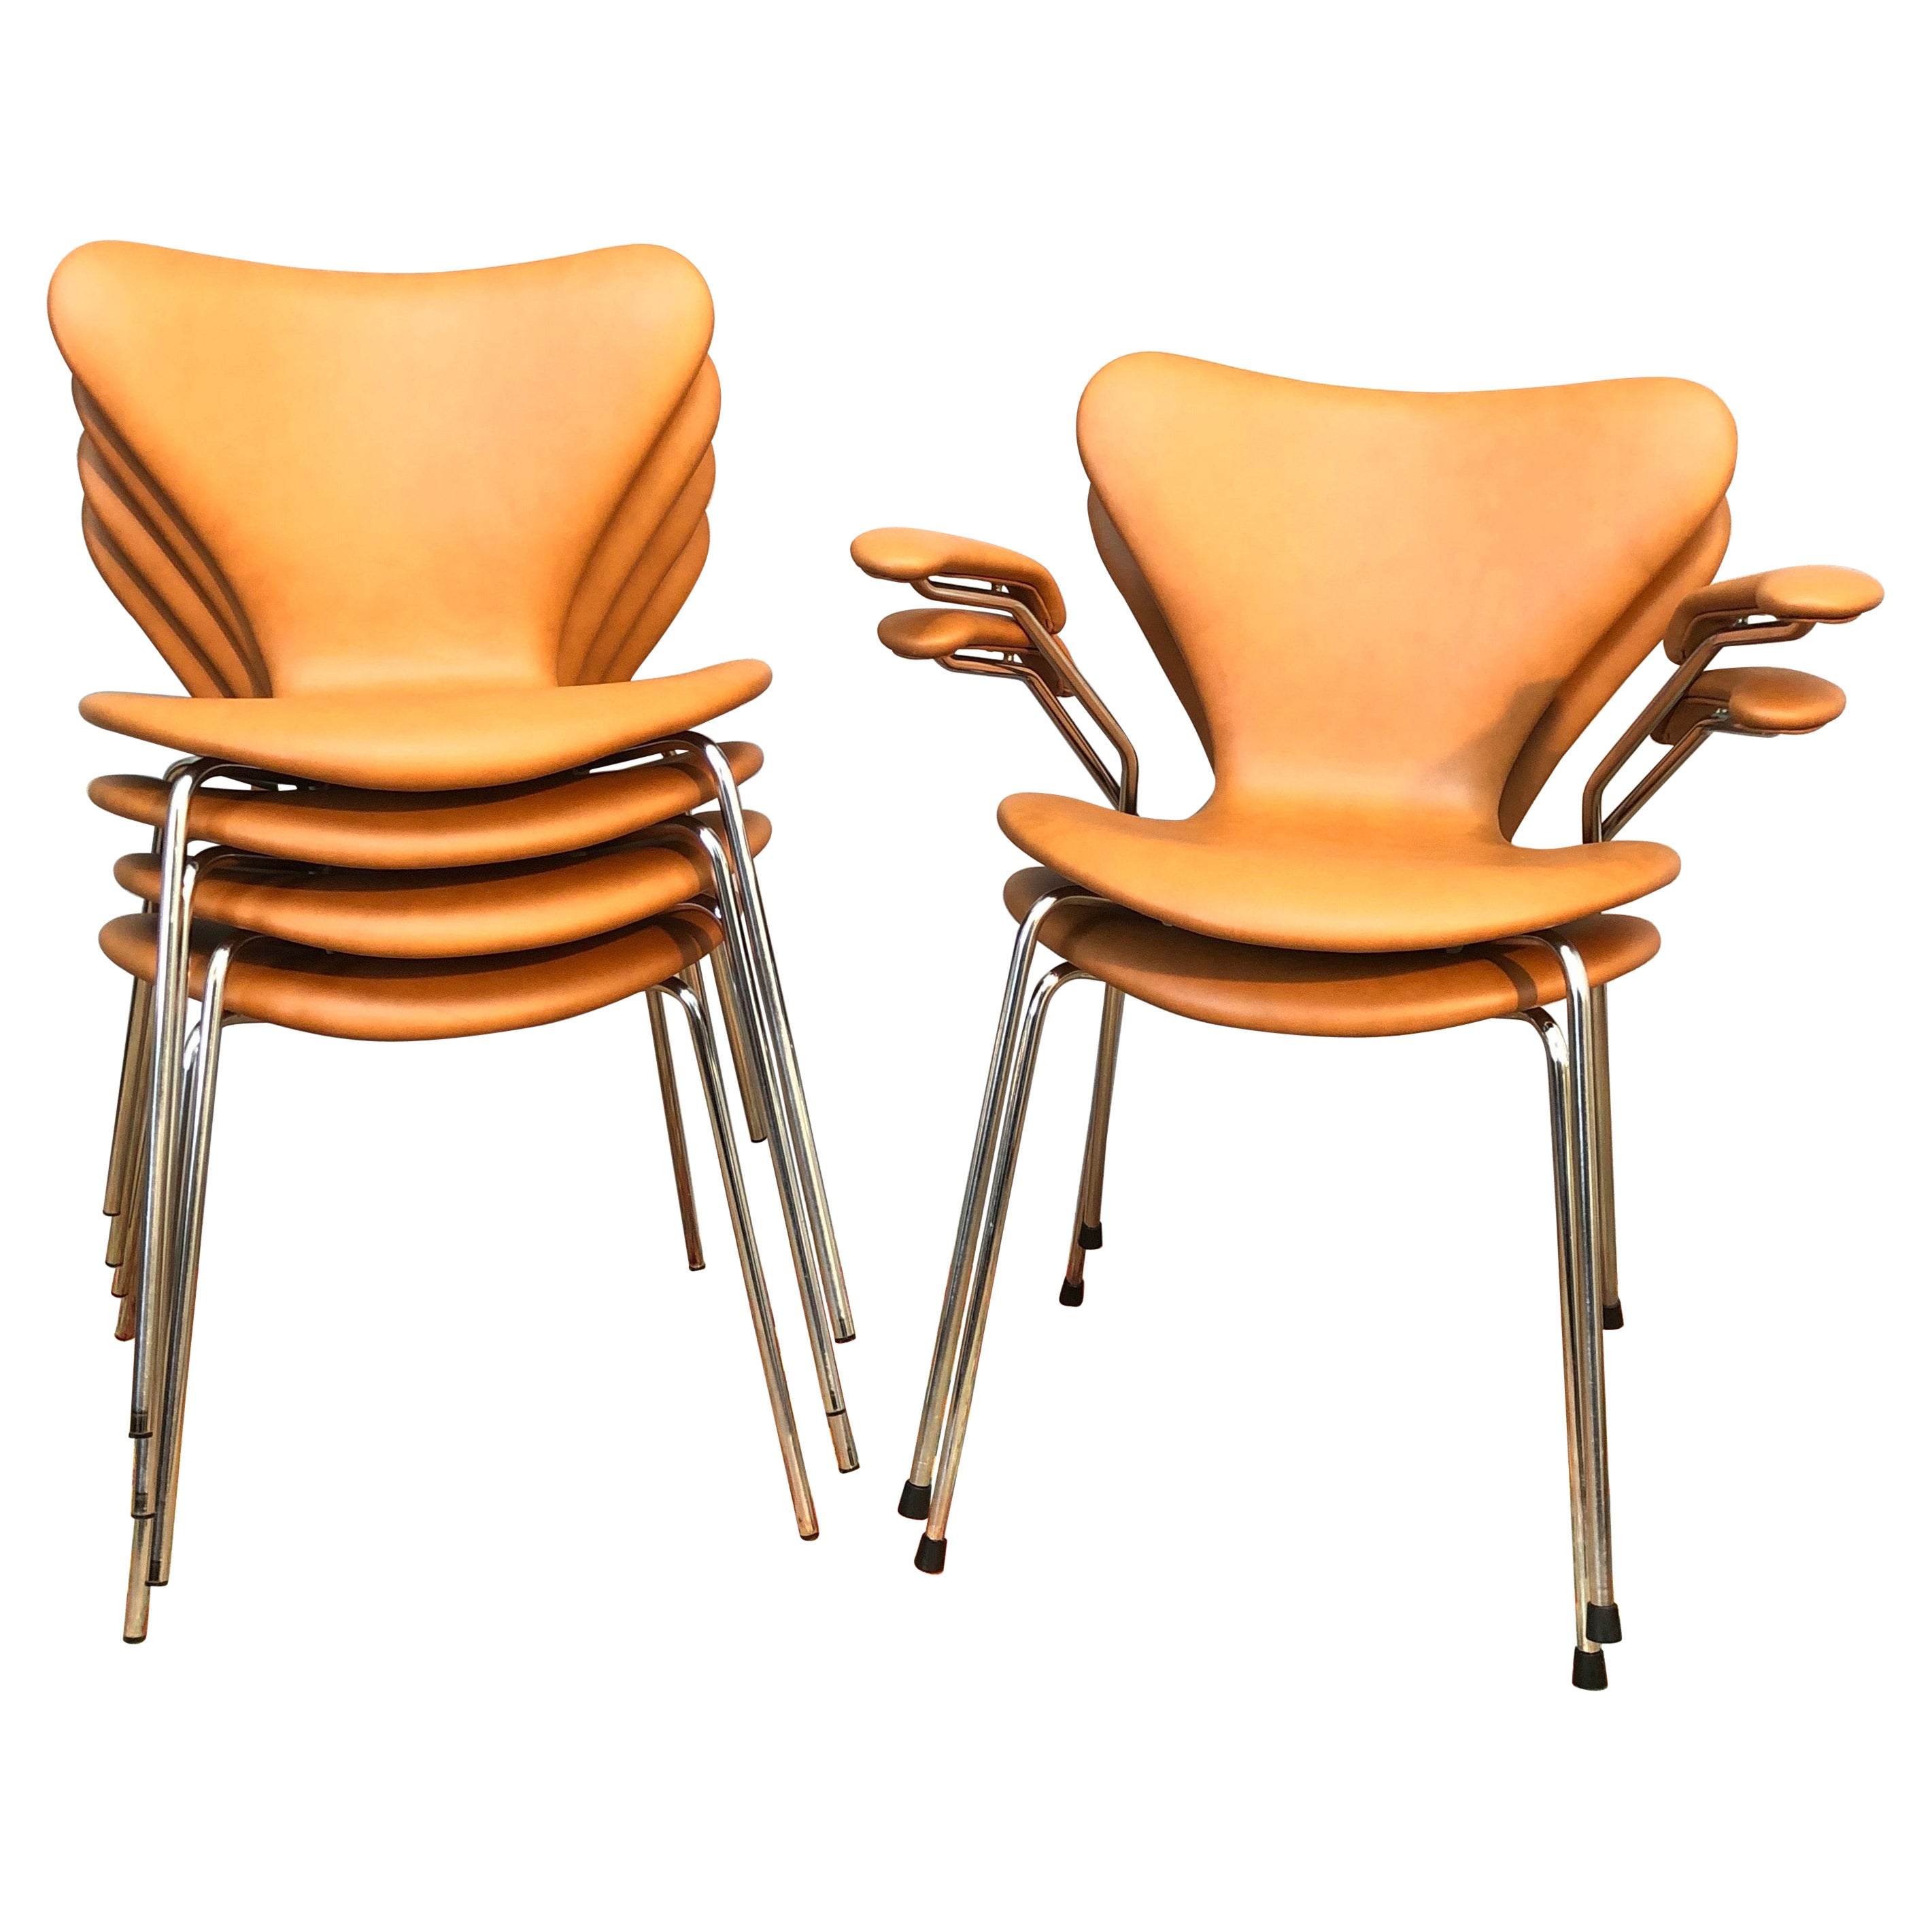 6 Vintage Iconic Chairs by Arne Jacobsen for Fritz Hansen in Leather